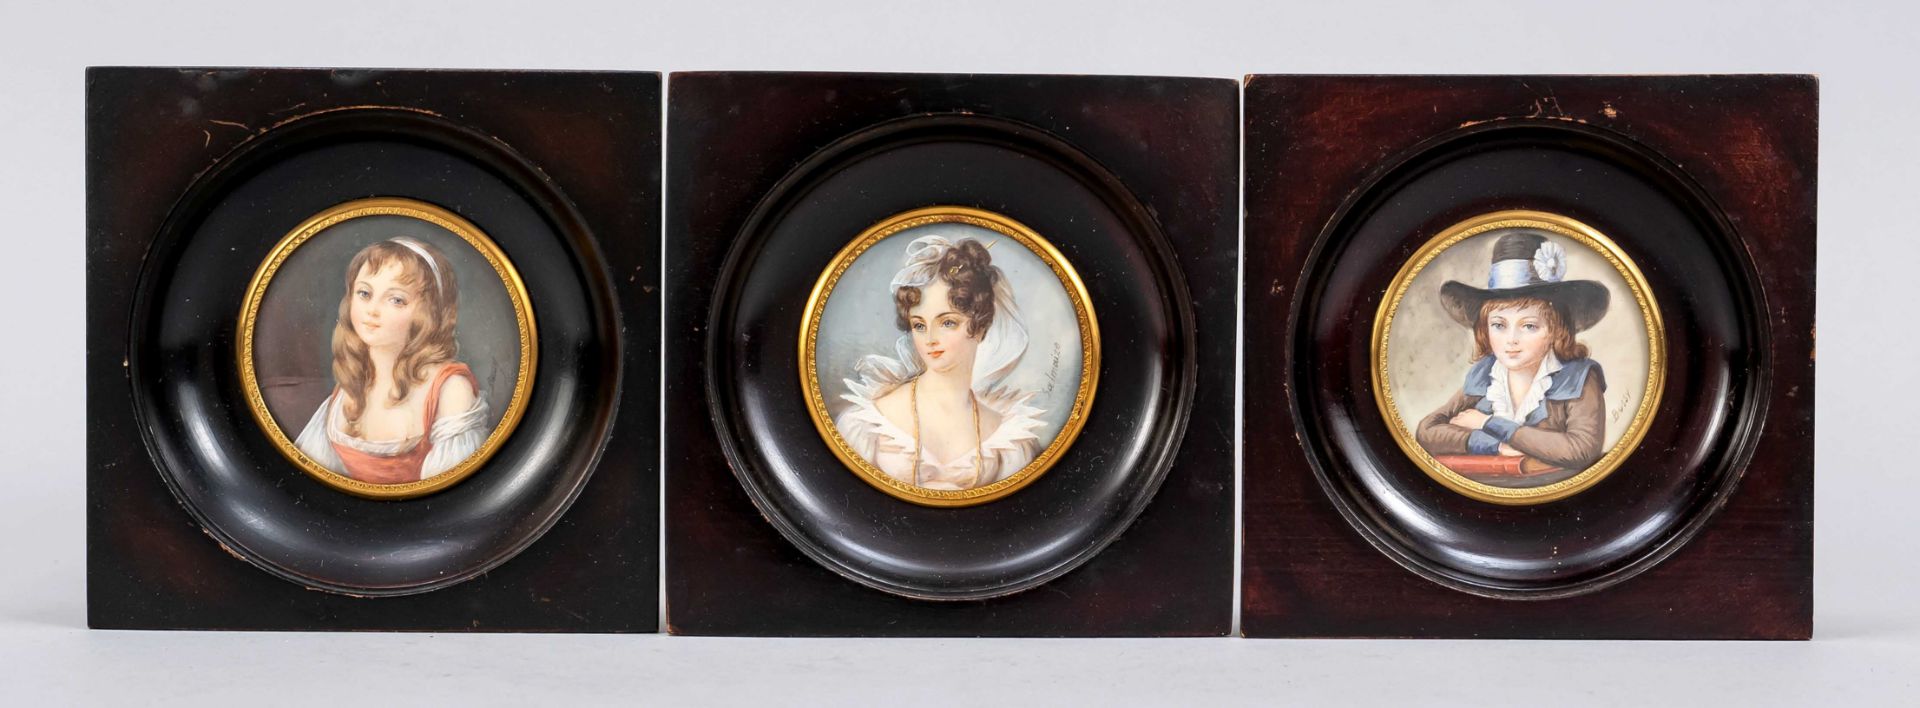 3 miniatures, 19th/20th c., polychrome on bone plate, with partly gilded brass cuffs in ebonized